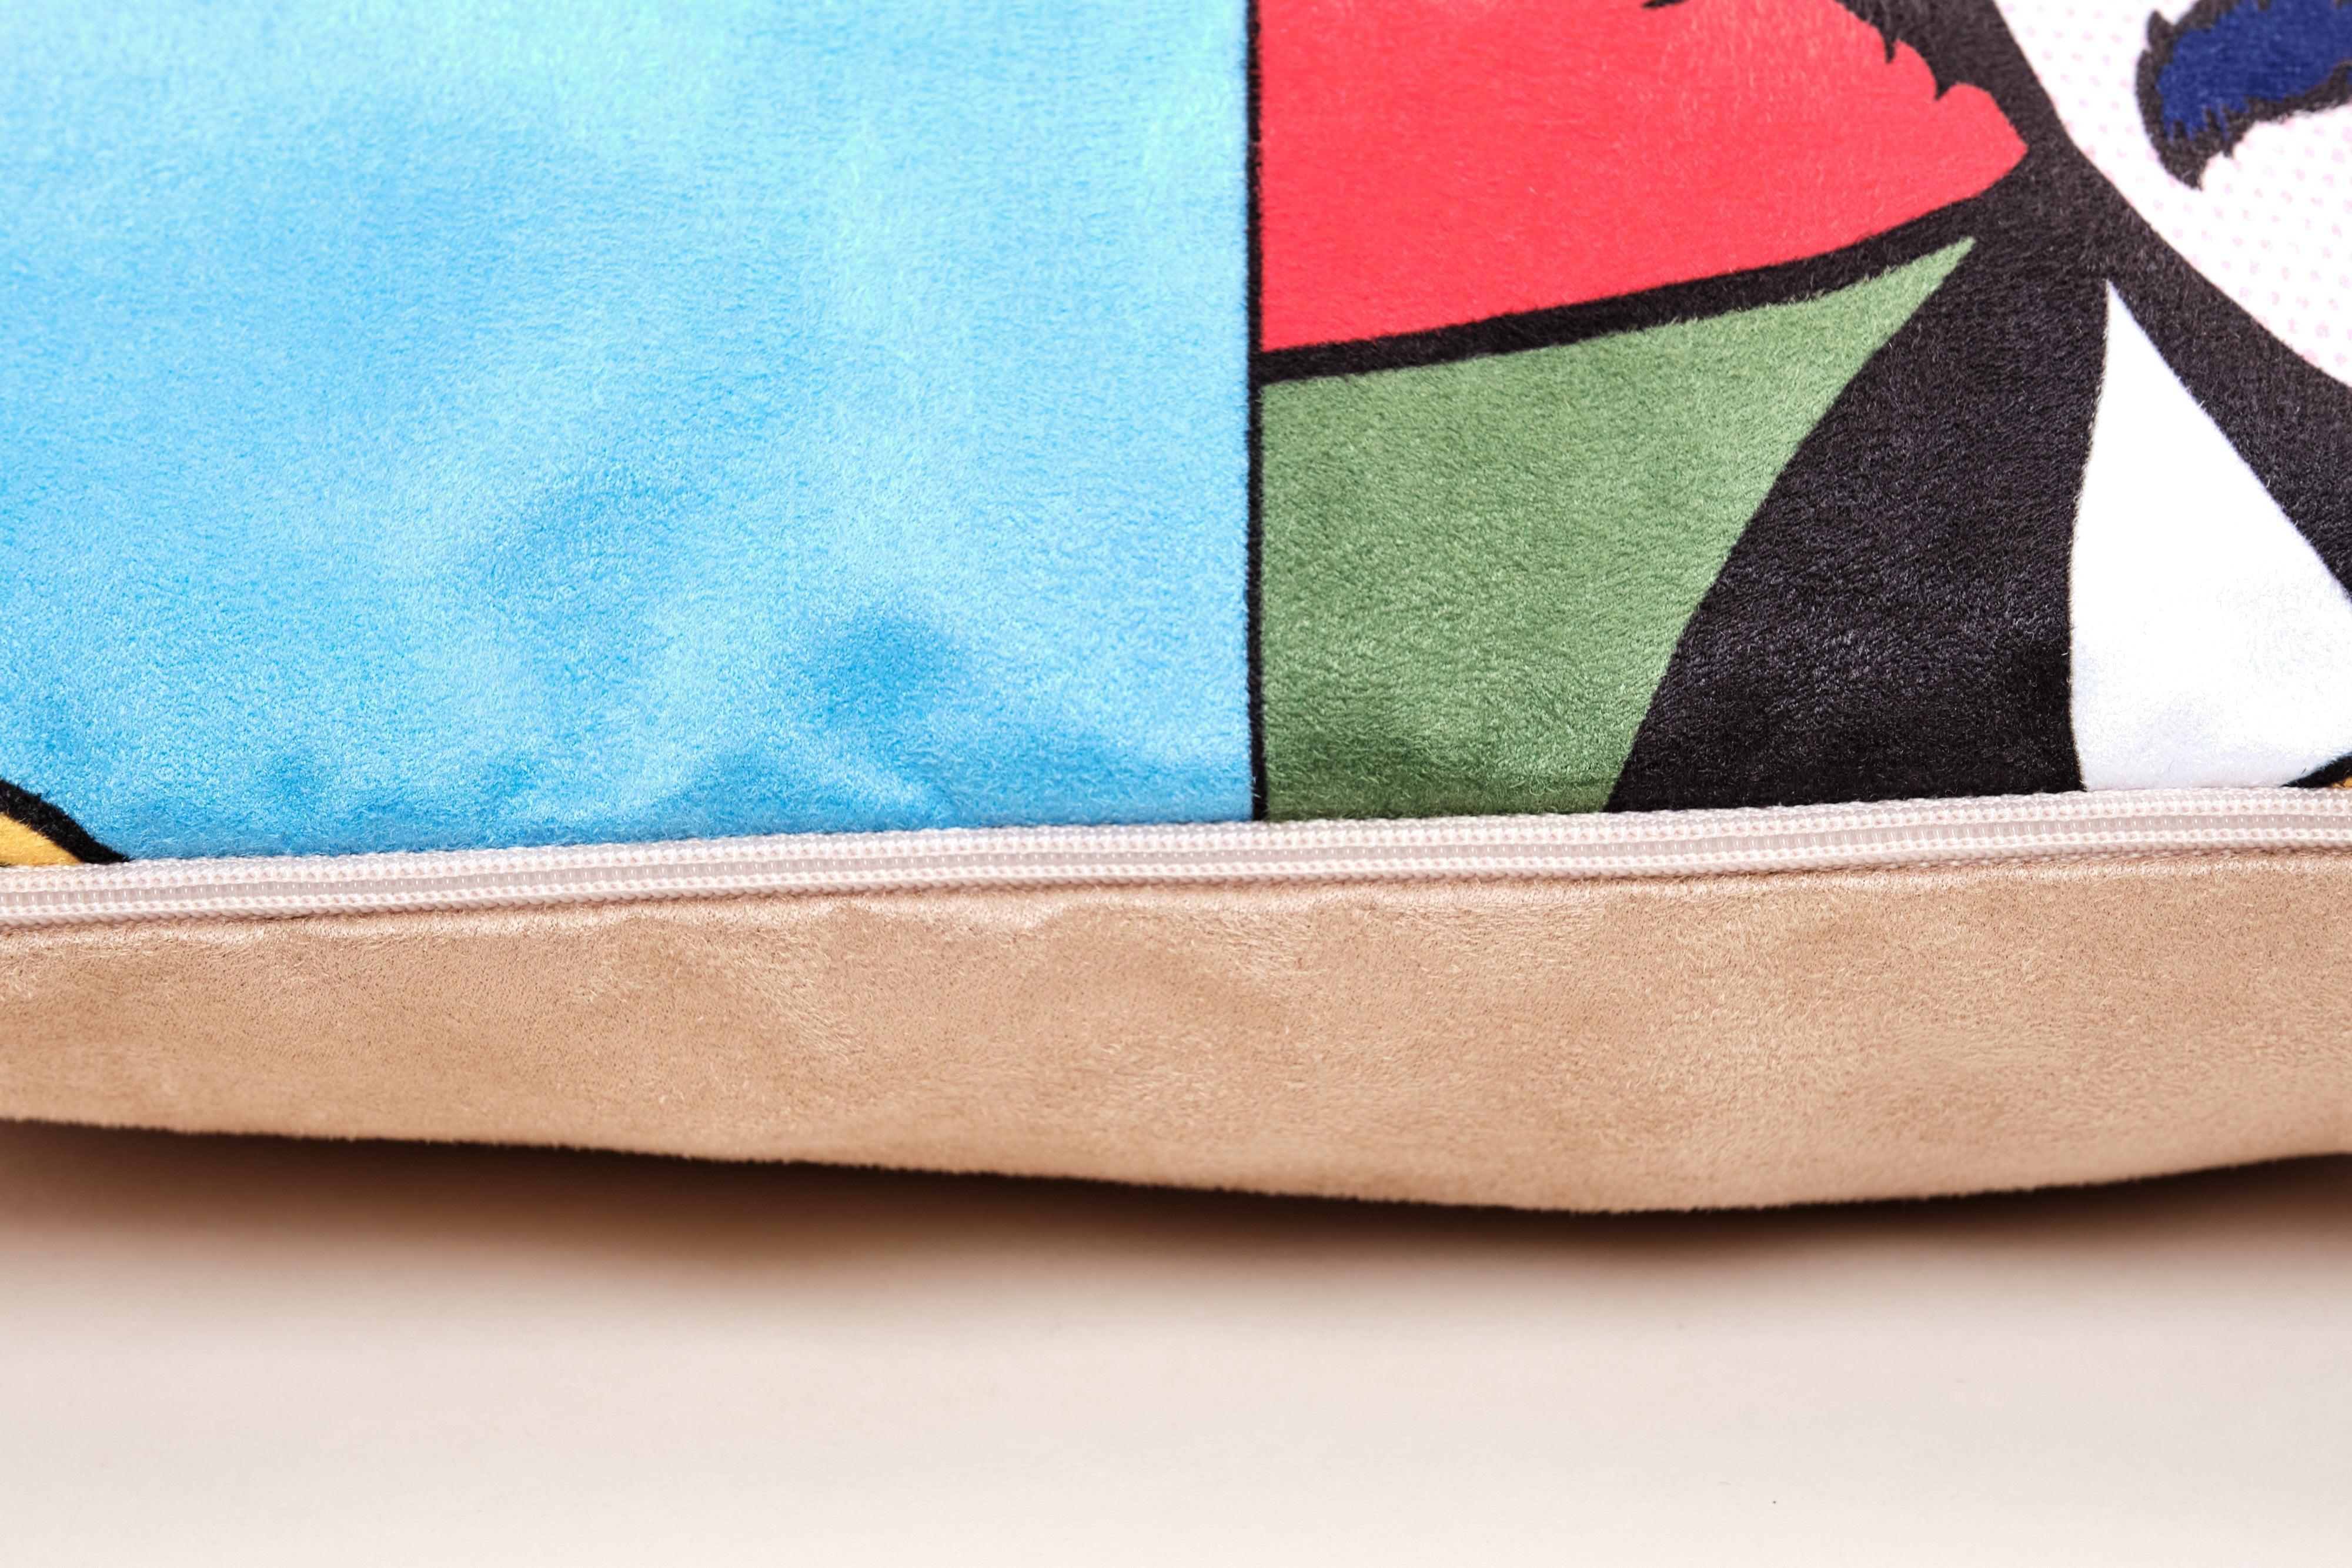 Red - Breasted Nuthatch - Robert Gillmor Cushion - Handmade Cushions UK - WeLoveCushions